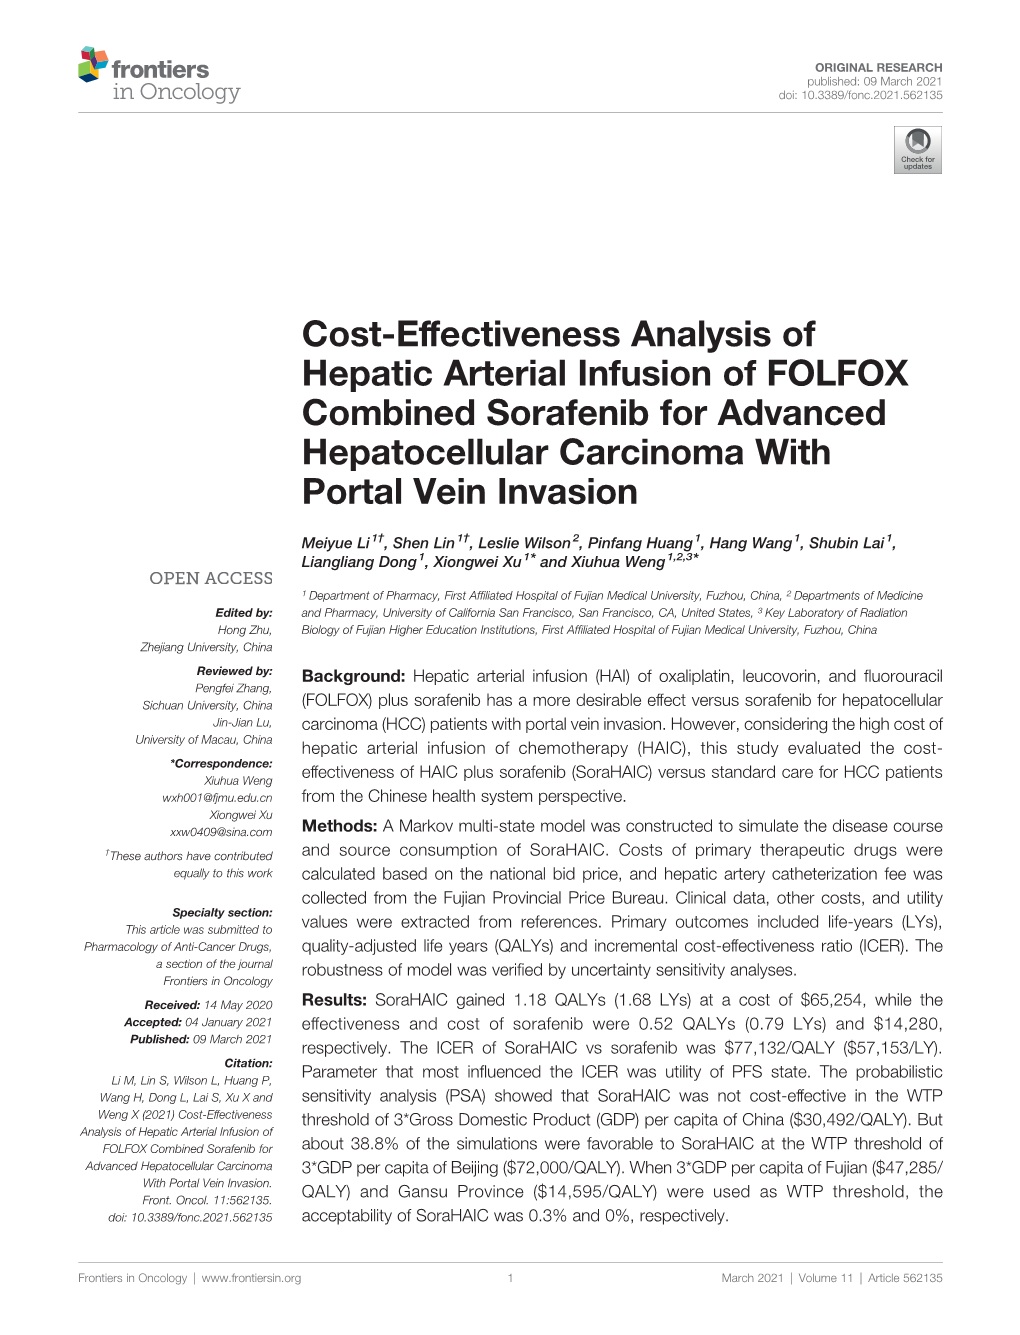 Cost-Effectiveness Analysis of Hepatic Arterial Infusion of FOLFOX Combined Sorafenib for Advanced Hepatocellular Carcinoma with Portal Vein Invasion